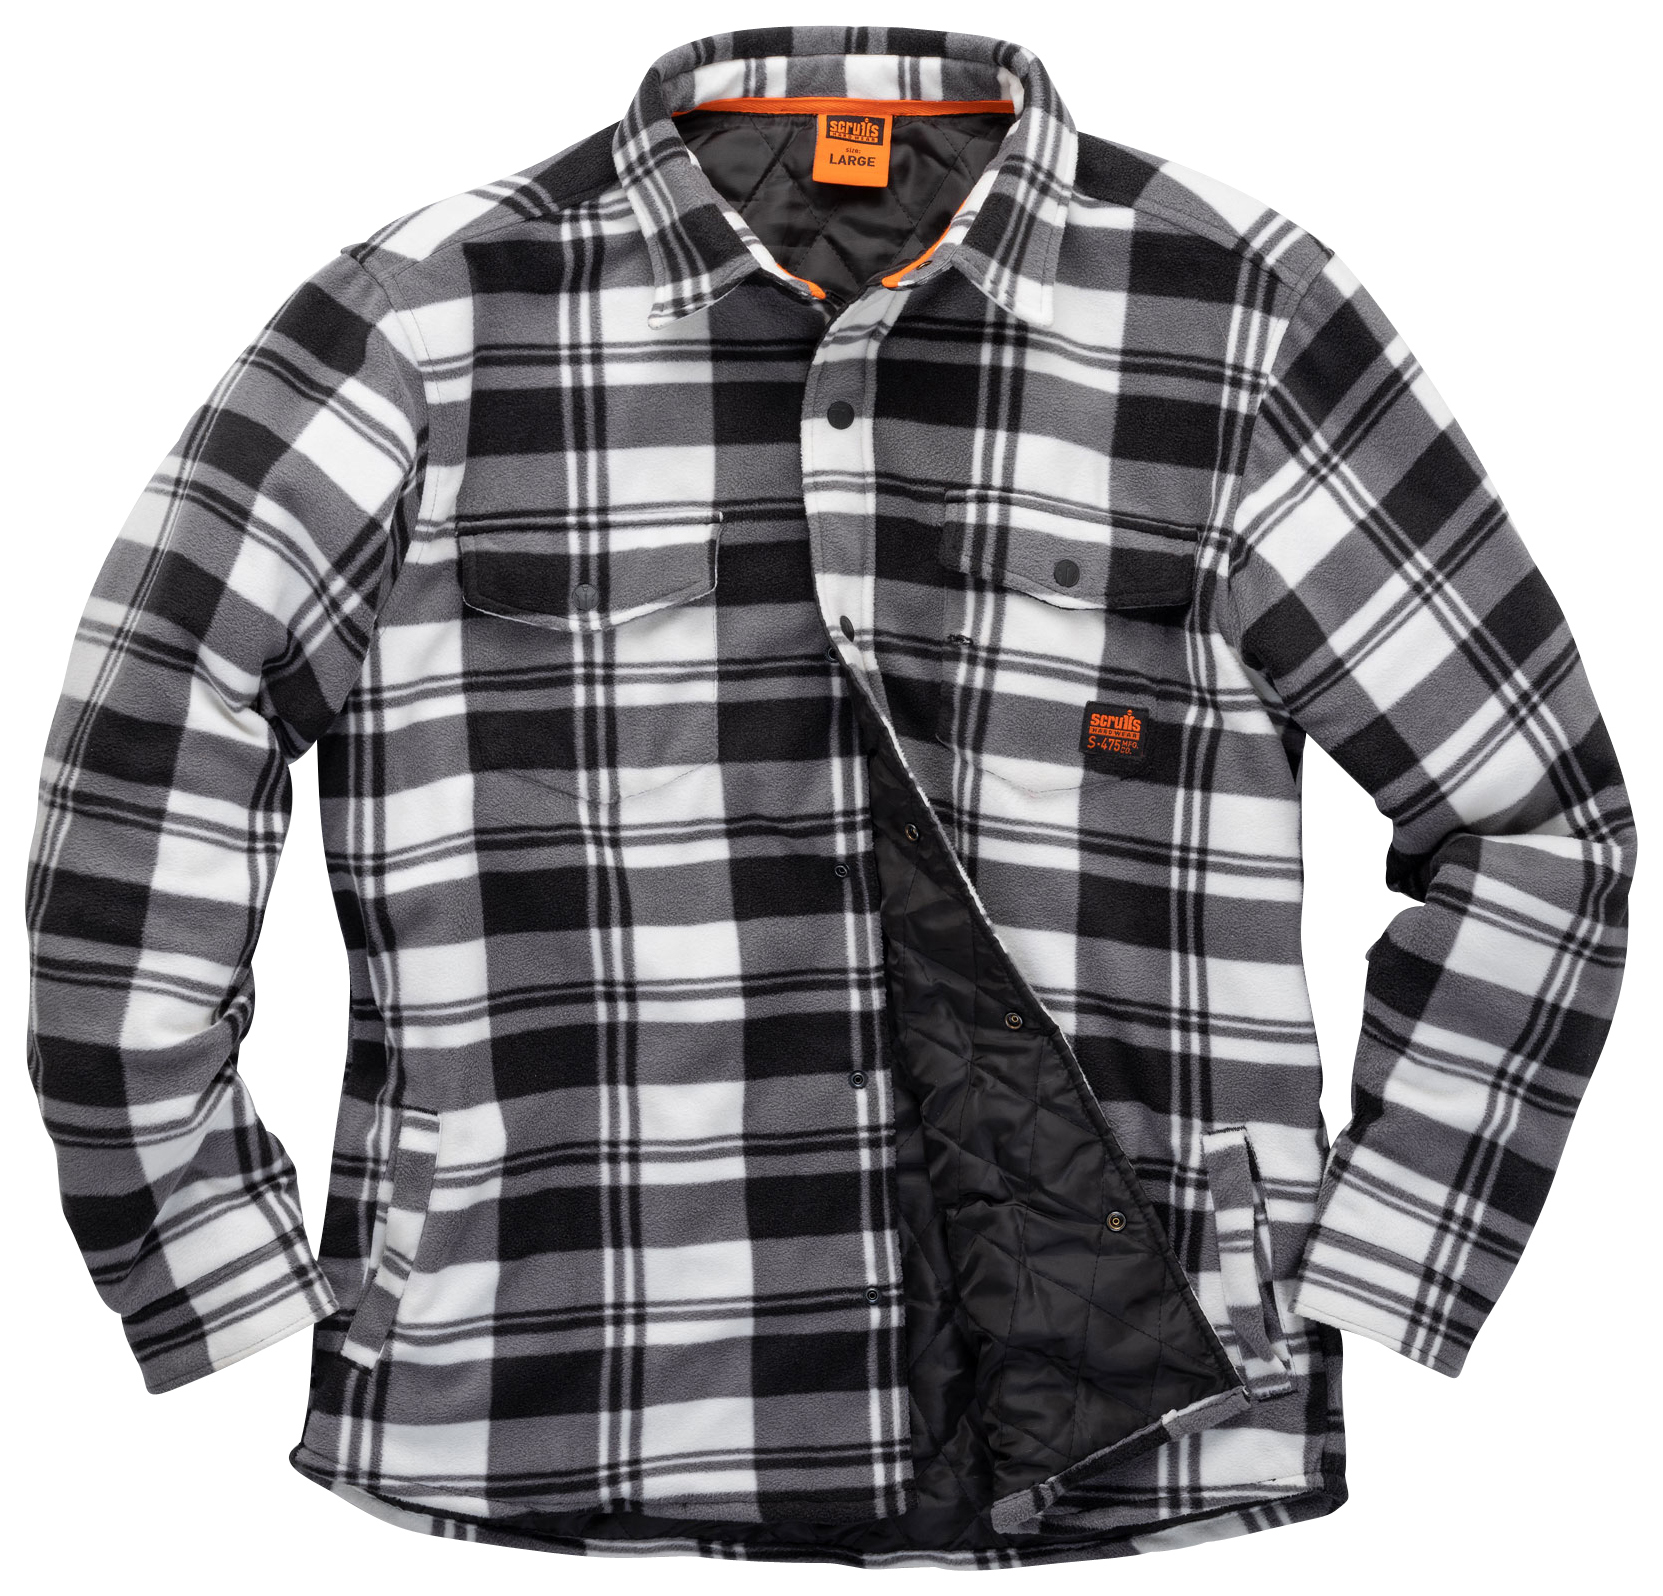 Image of Scruffs Worker Padded Checked Shirt, in Black and White Quick-Drying, Size: L